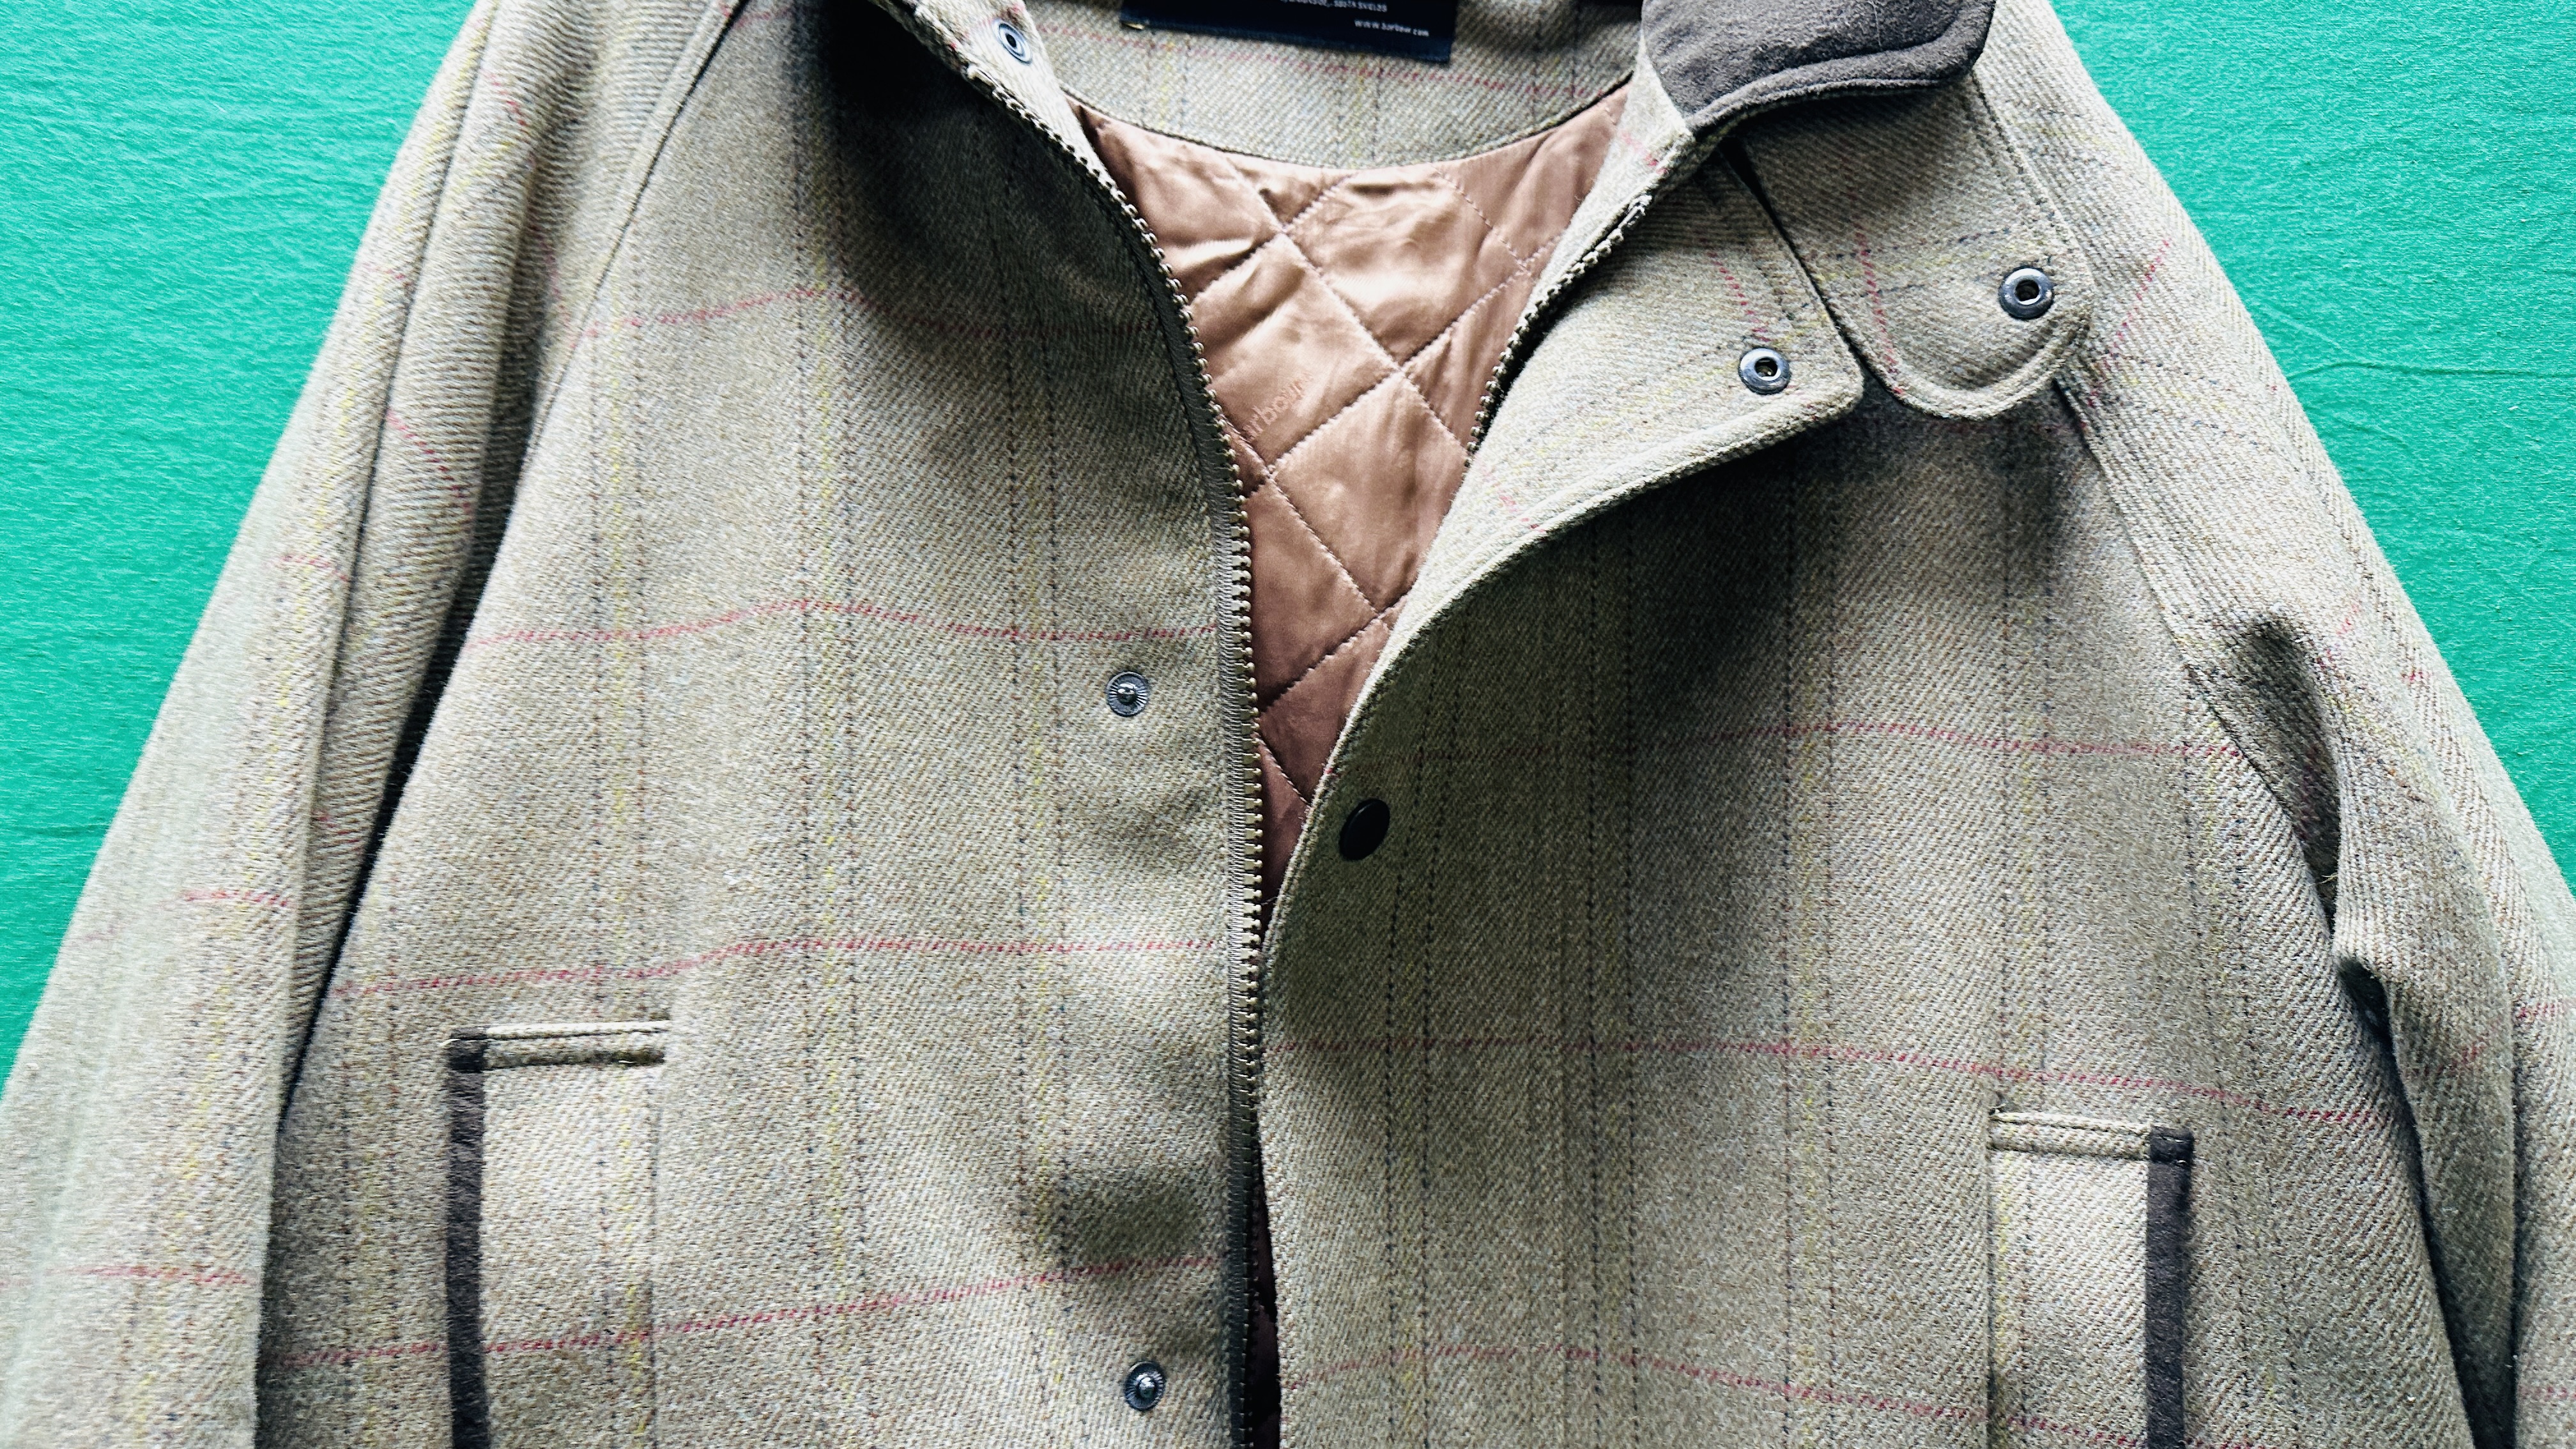 BARBOUR DOUBLE TWIST 100% MERINO 2 PLY TWEED COUNTRY COAT, STYLE T19, - Image 3 of 11